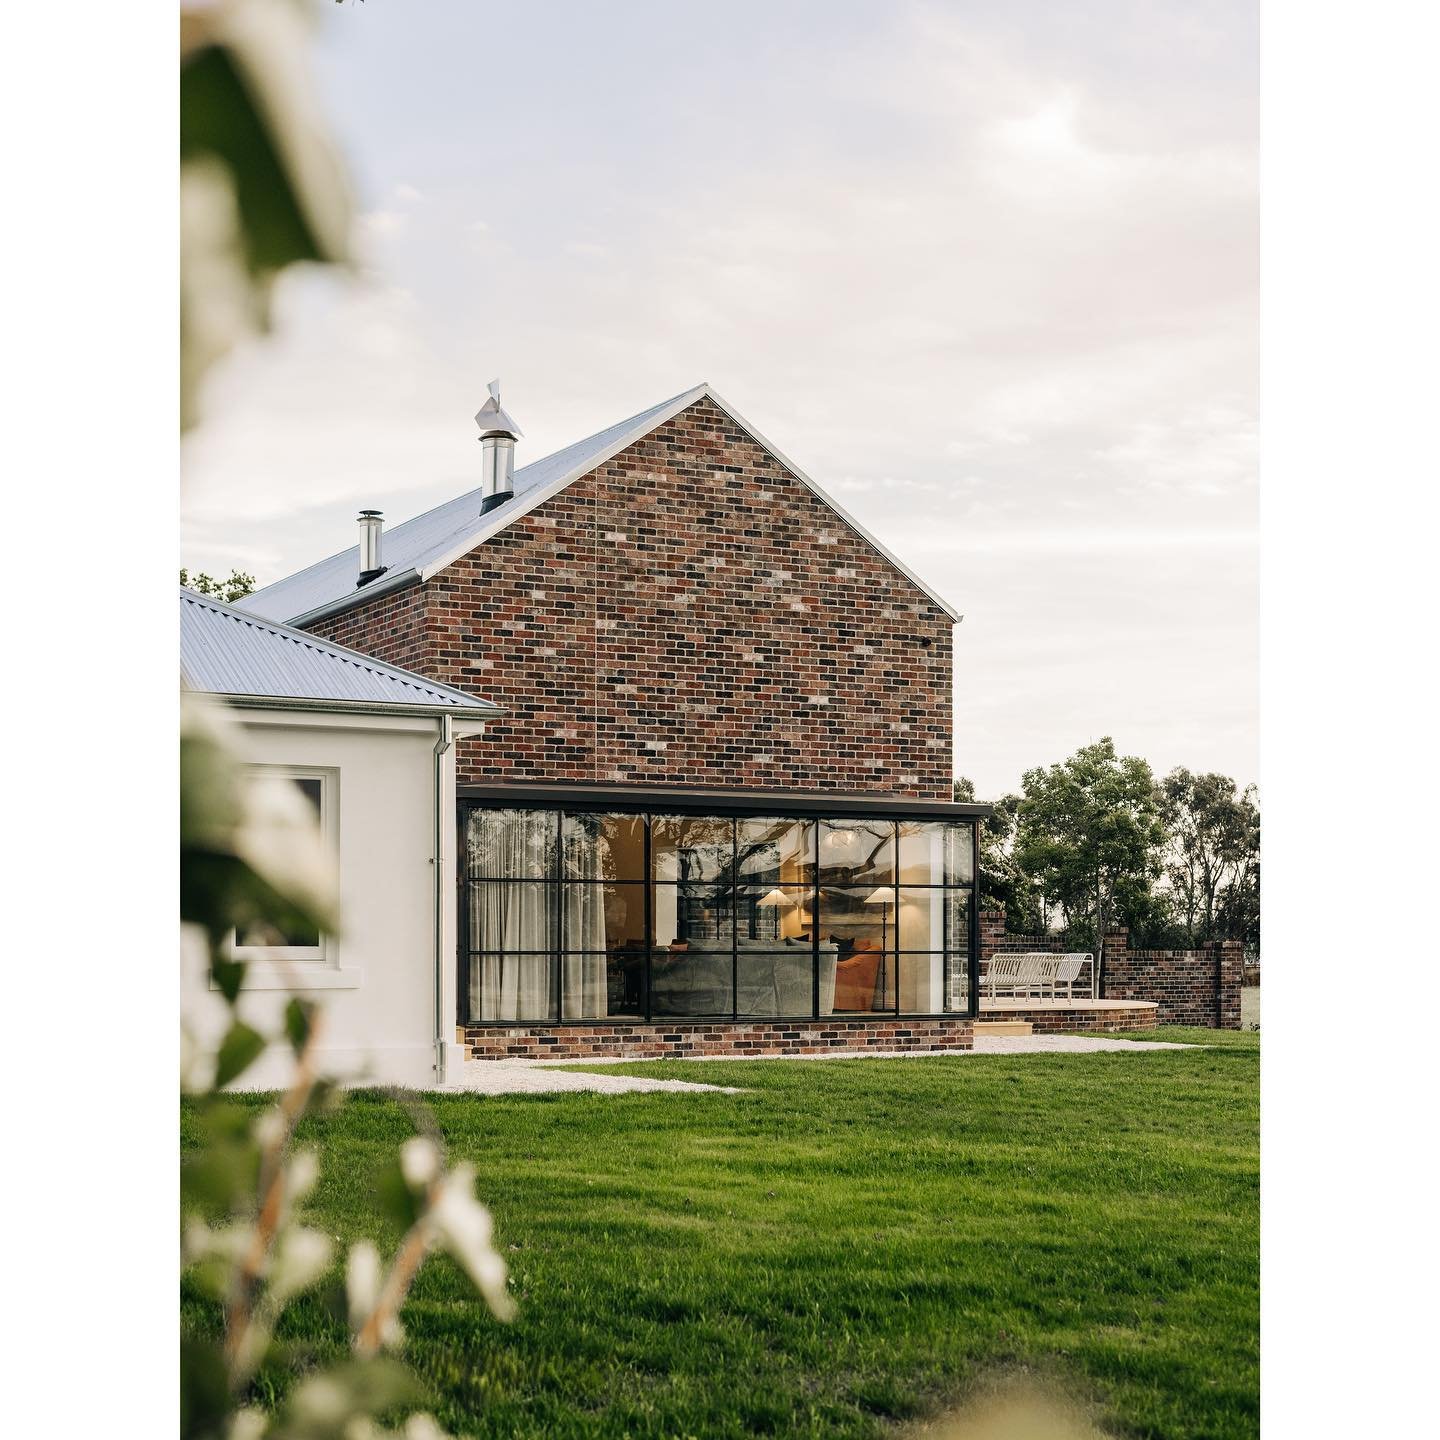 We are excited to share the newly completed Leighton House, an historic family home near Evandale in lutruwita/Tasmania. The property lies on the banks of mangana lienta/South Esk River, the border between two palawa nations. 

The farmhouse is dated